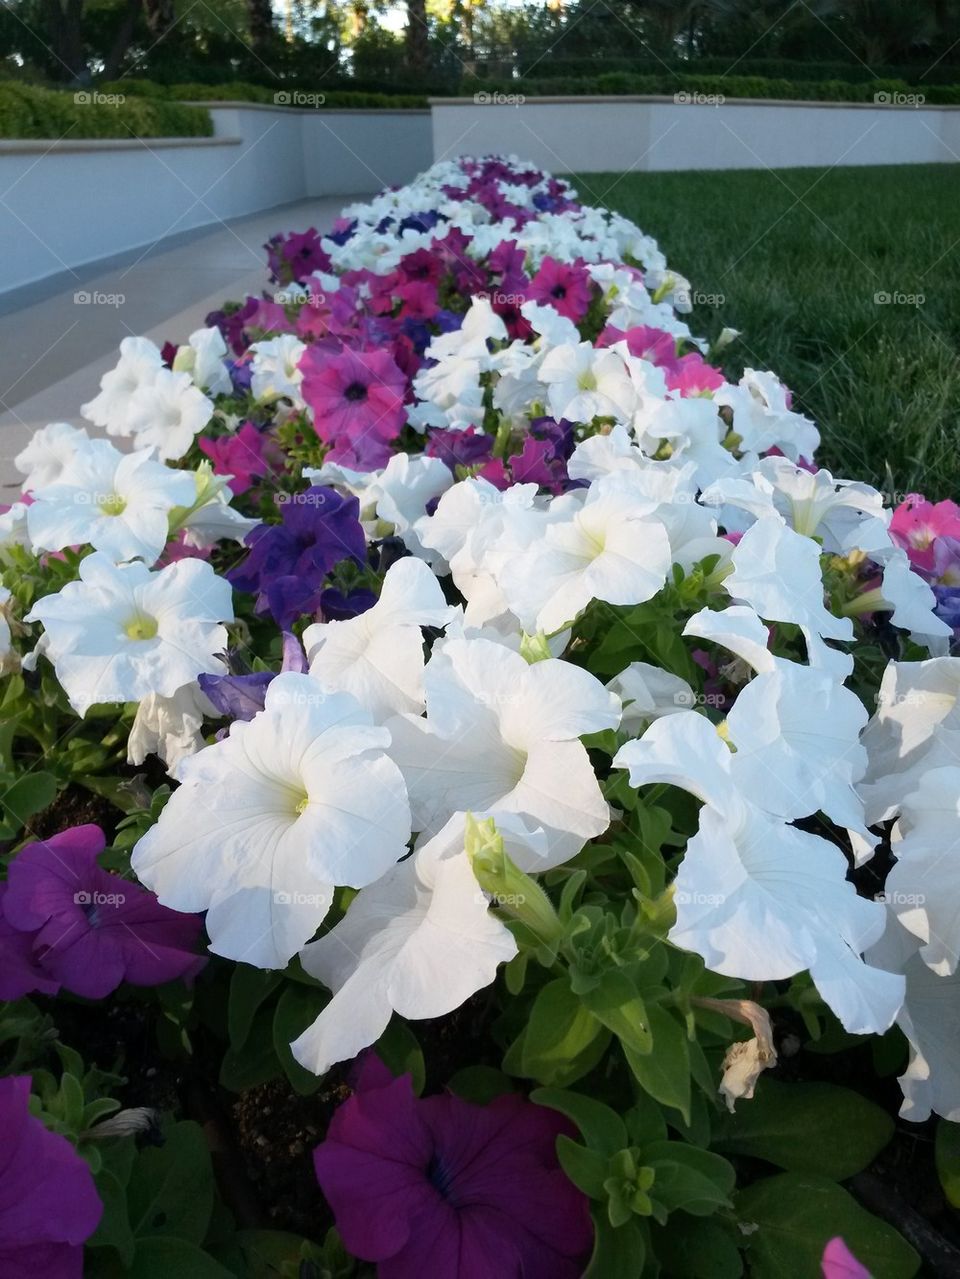 Landscaped with Petunias